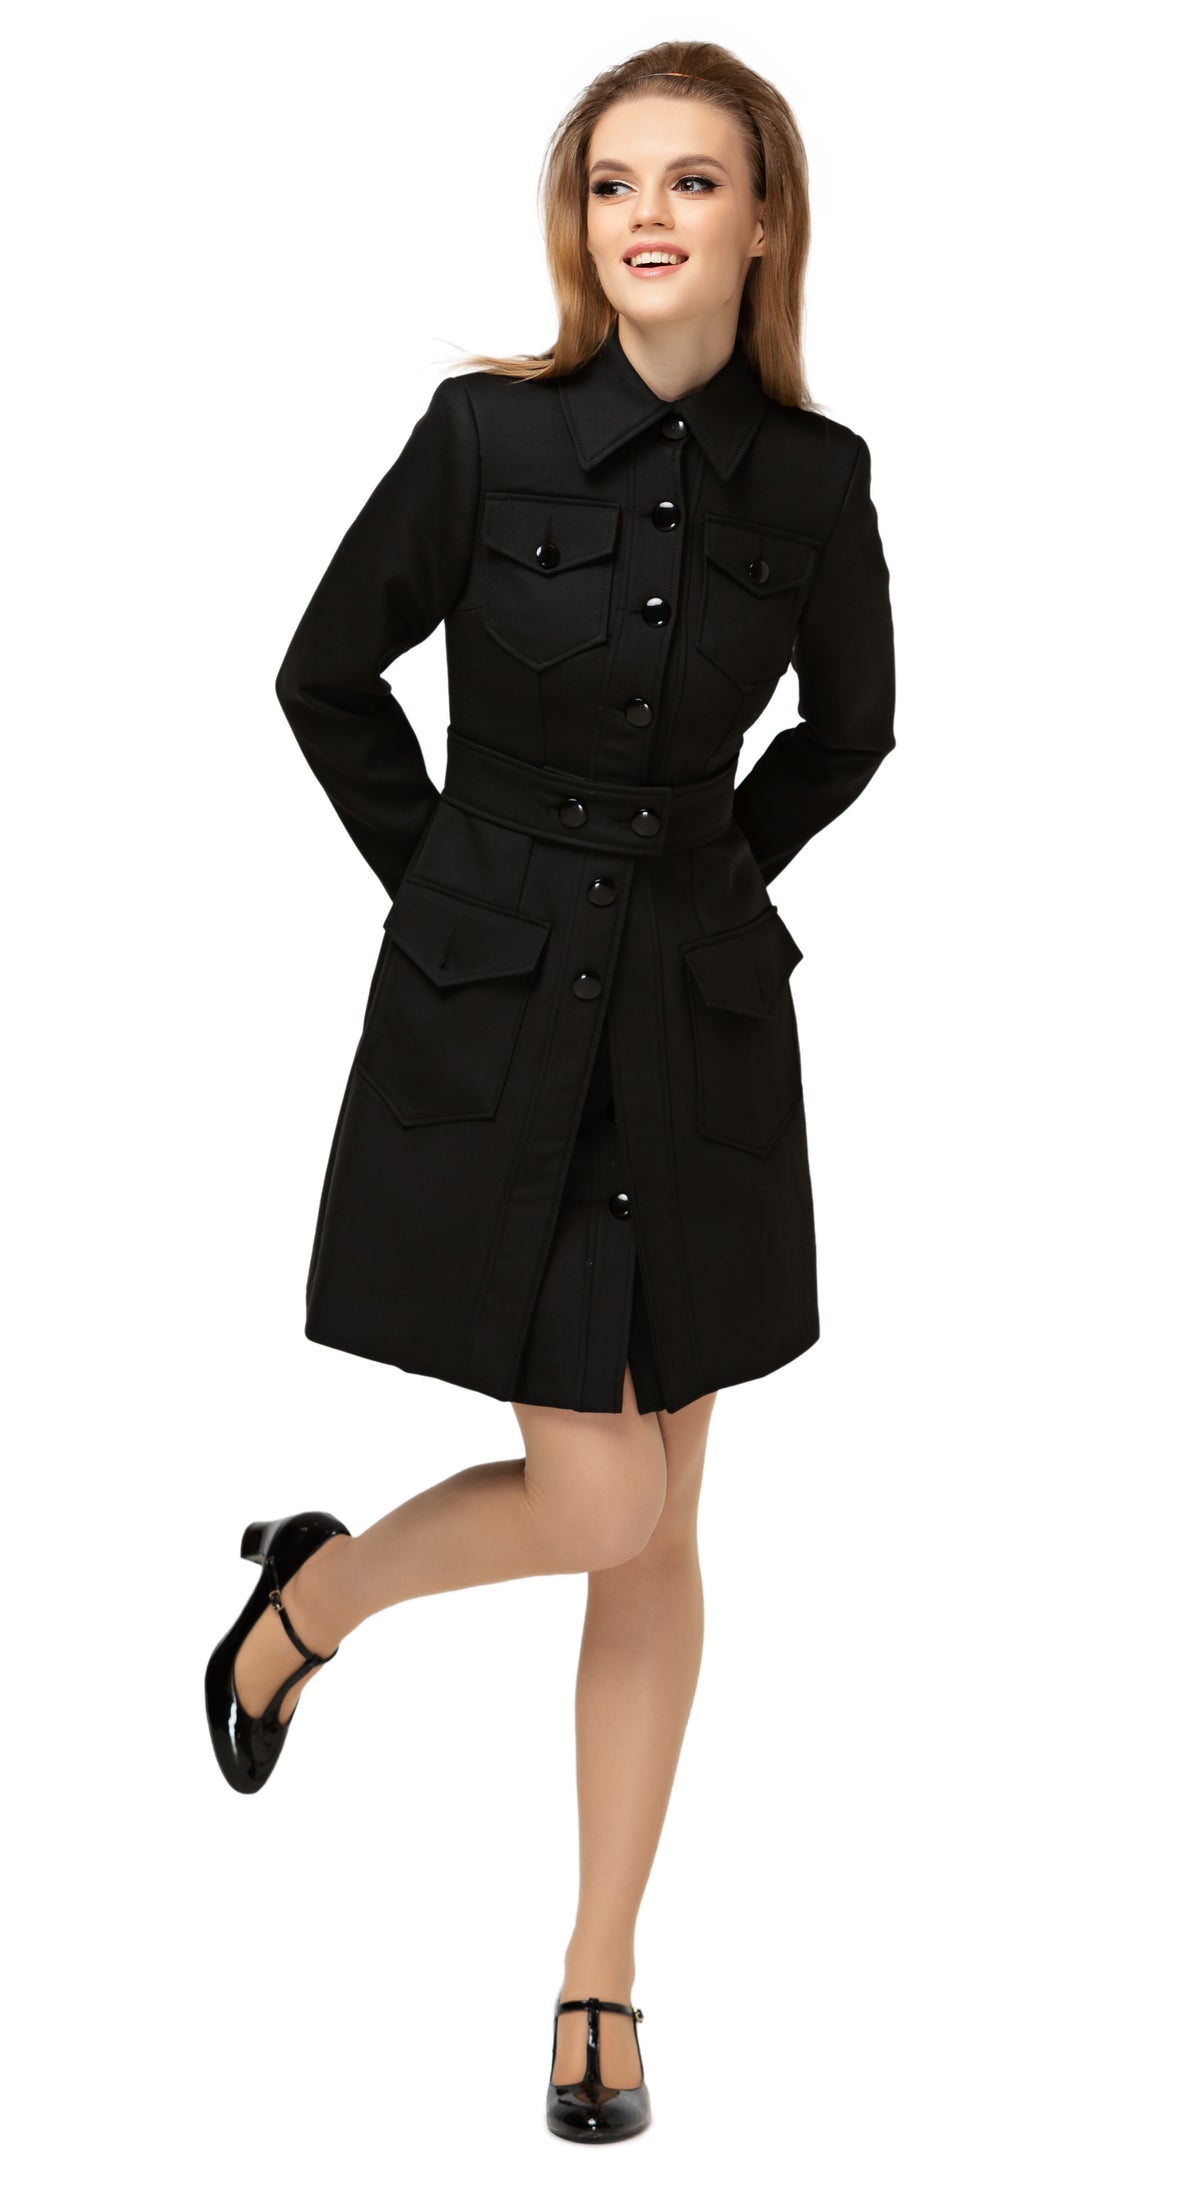 A classic Sixties style; fitted, fully lined, Spring coat with front button closure, functional breast and front pockets divided by detachable dual button belt and classic collar. Produced from premium Italian fabric.  Also available in light yellow.  Choose bespoke to alternate hem length or colour.